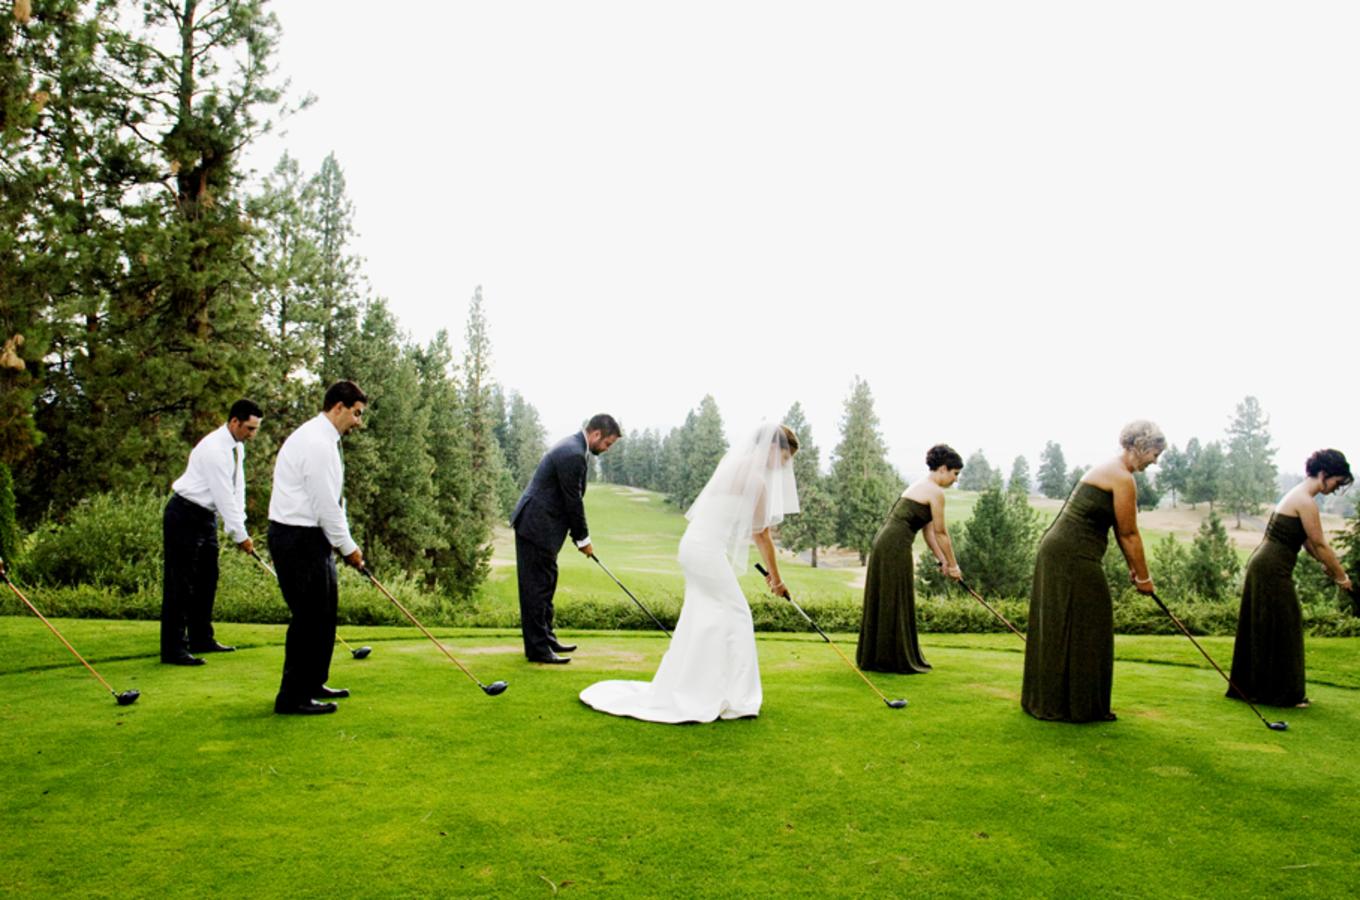 Gallagher's Canyon - Weddings & Events Image 7